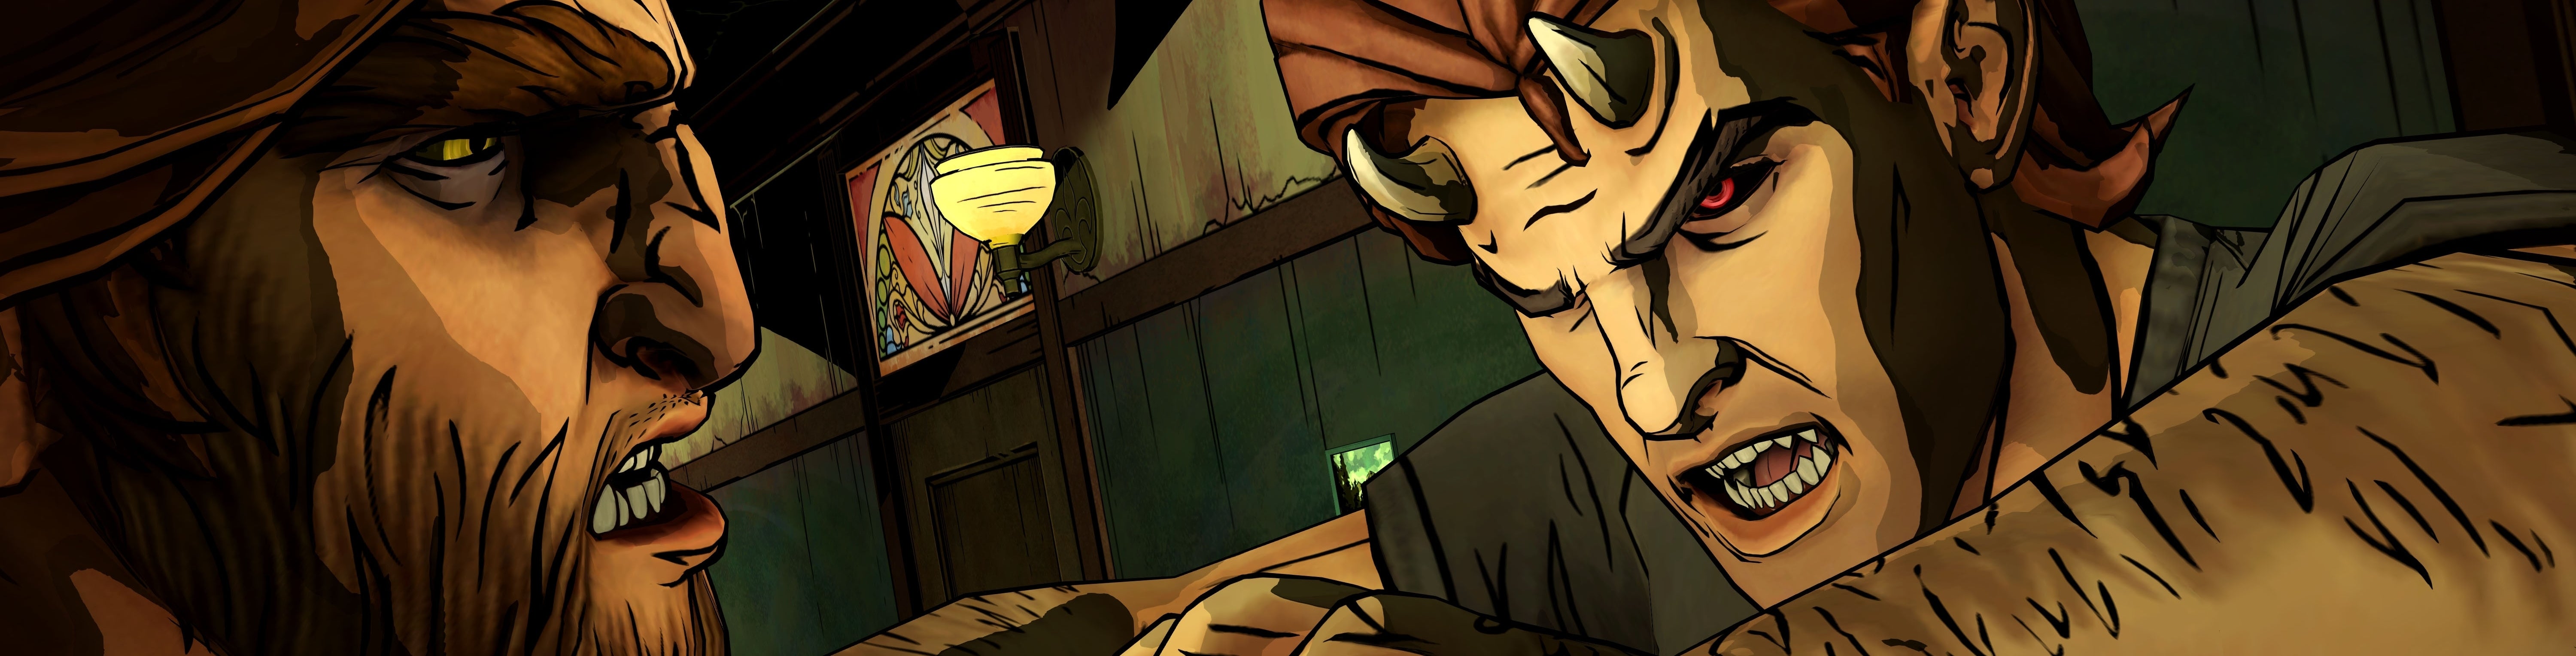 Image for The Wolf Among Us, Episode 2: Smoke and Mirrors review